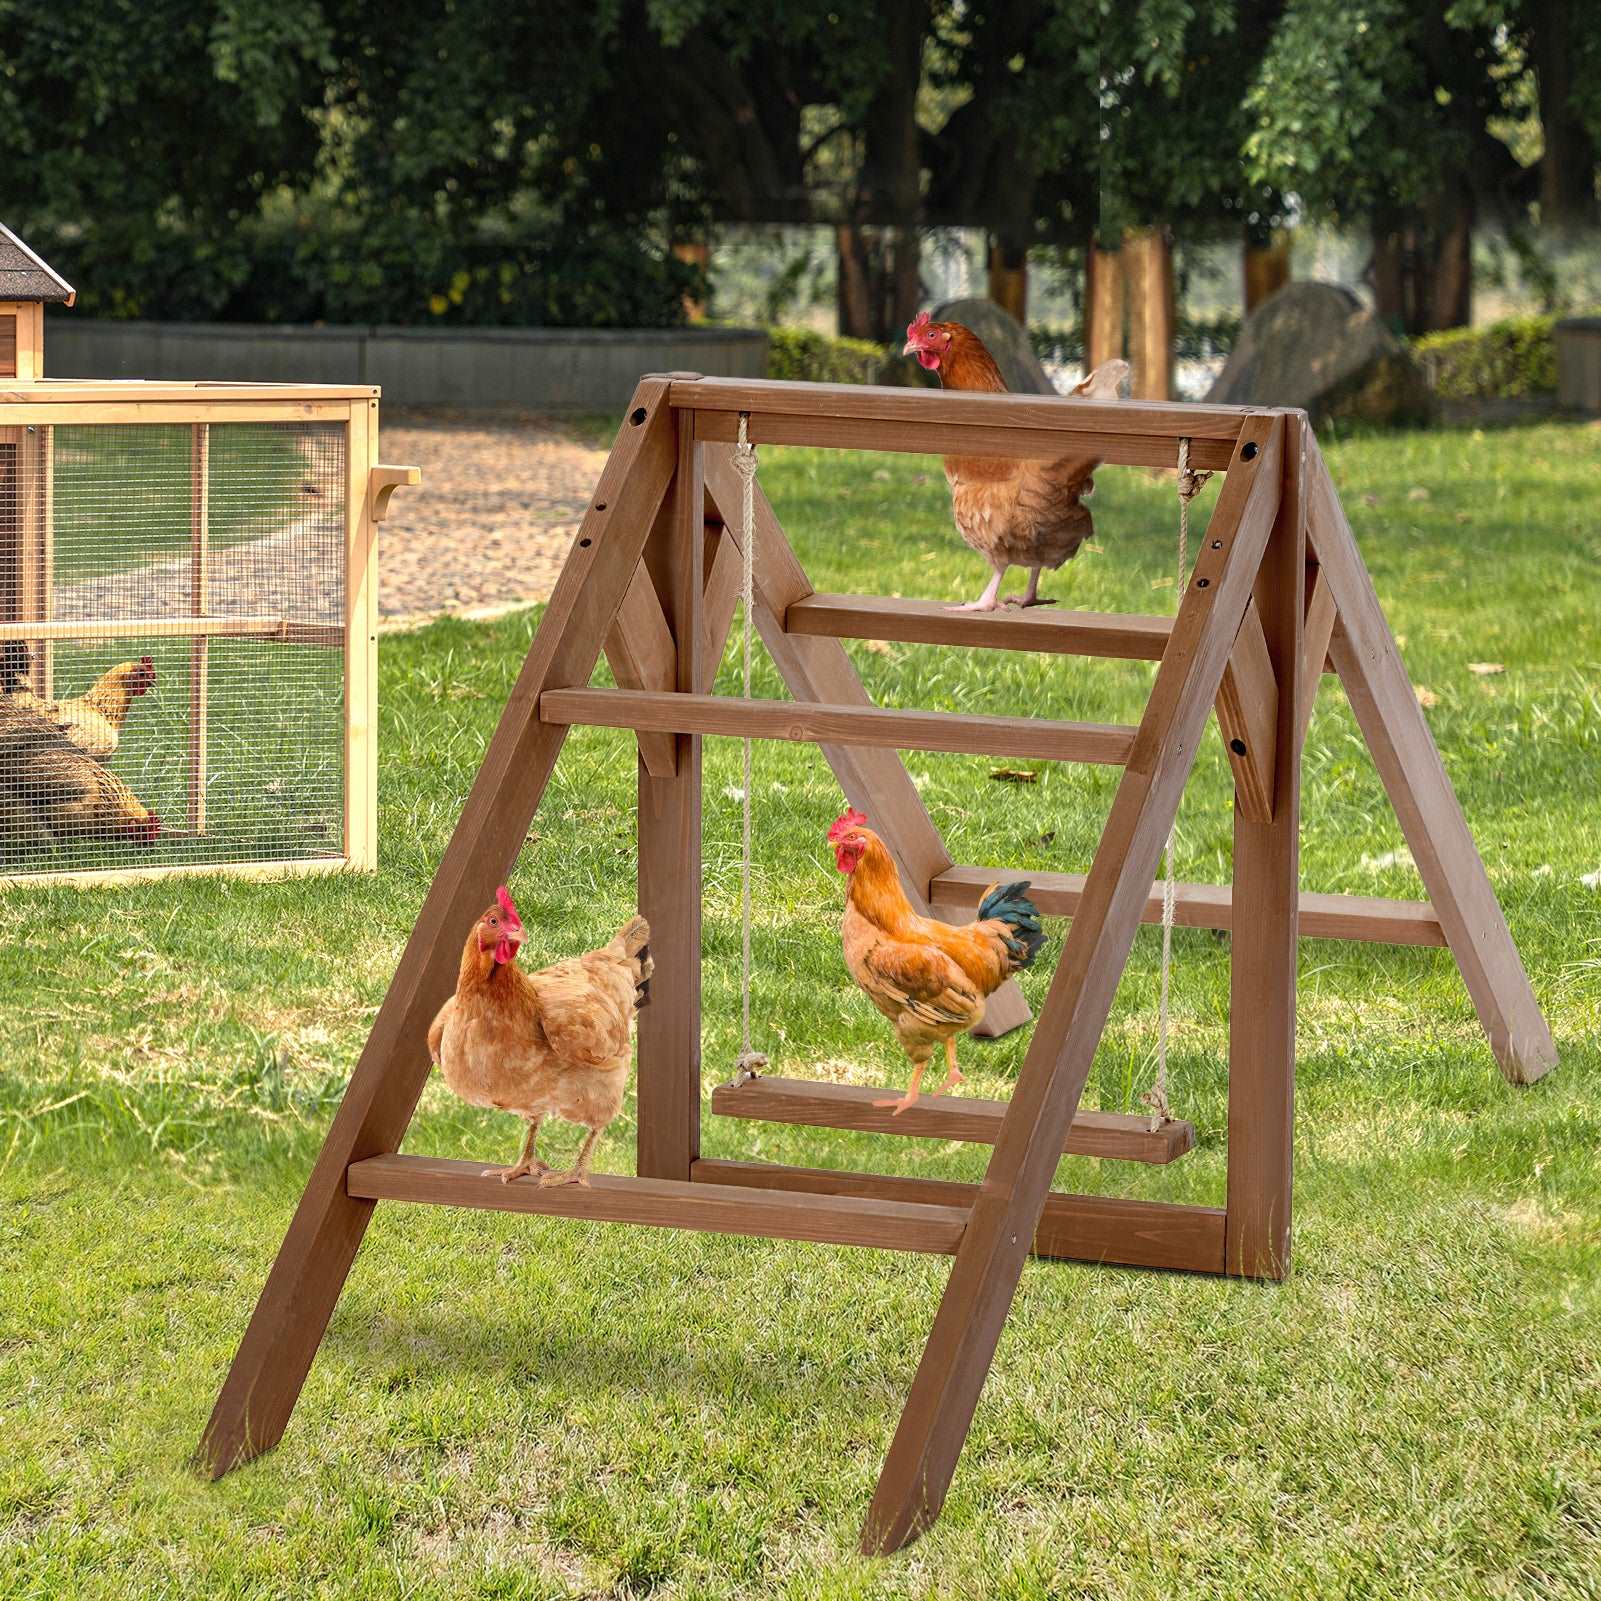 petsfit-chicken-toys-for-coop-accessories-5-chicken-perches-with-swing-are-perfect-for-8-10-chickens-wooden-chicken-ladder-for-pets-healthy-happy-05